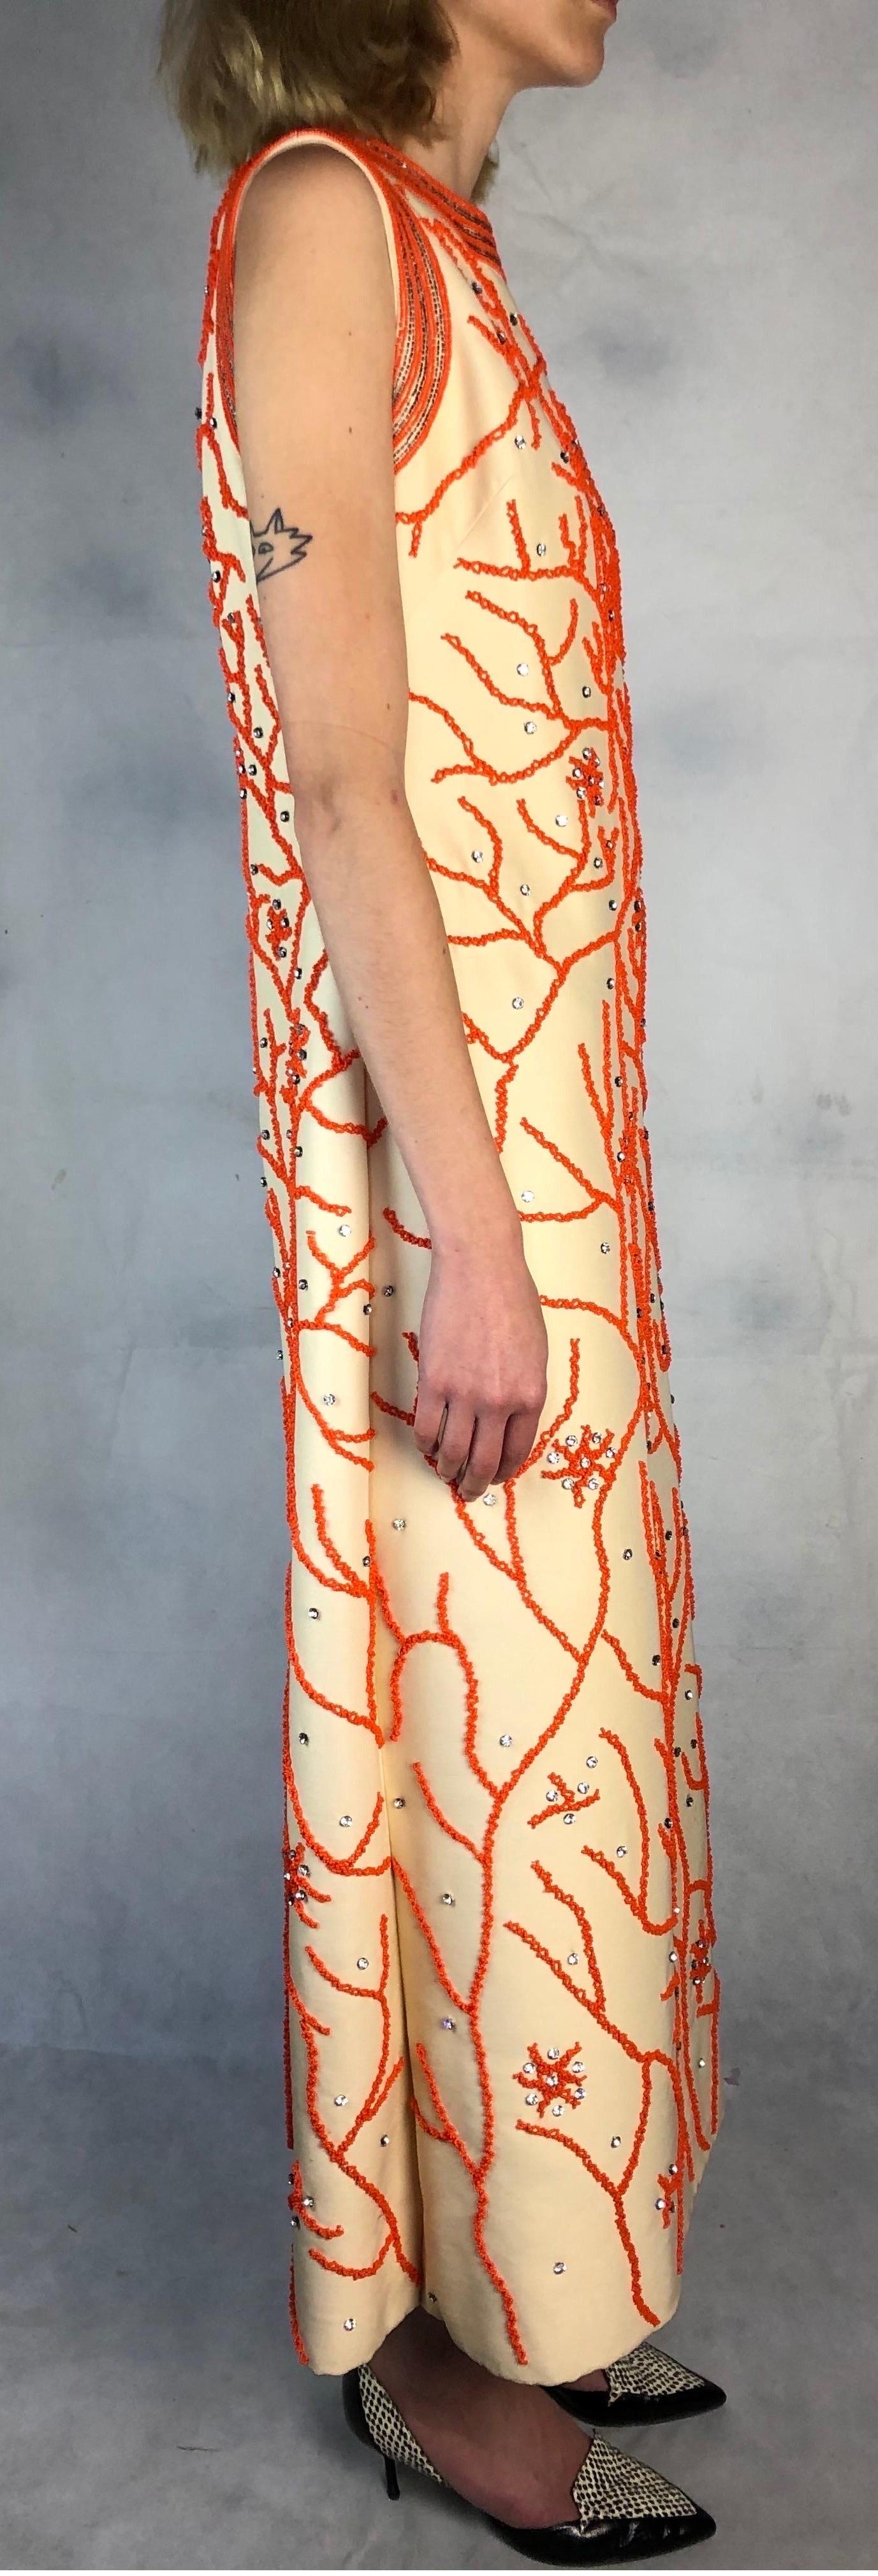 Attributed to  Valentino dress constructed with wool and silk material. Fully hand beaded with glass beads into a coral reef motif. featuring a round neck and sleeveless. Fully lined  